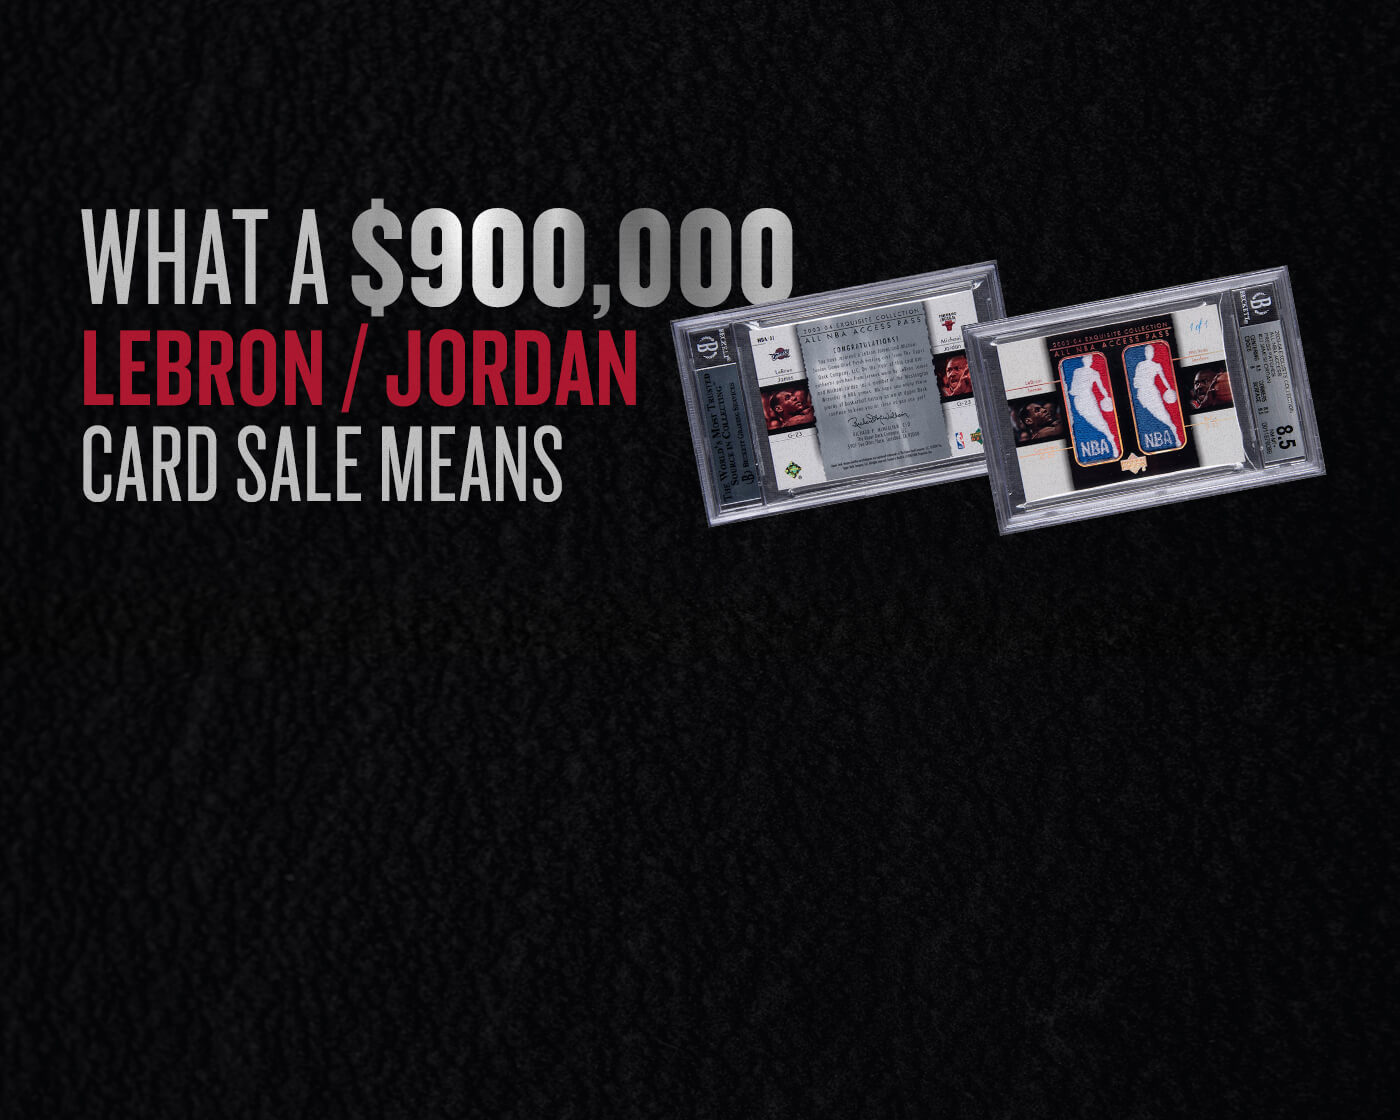 Jordan-LeBron Card Sells For $900,000: Here’s What It Means